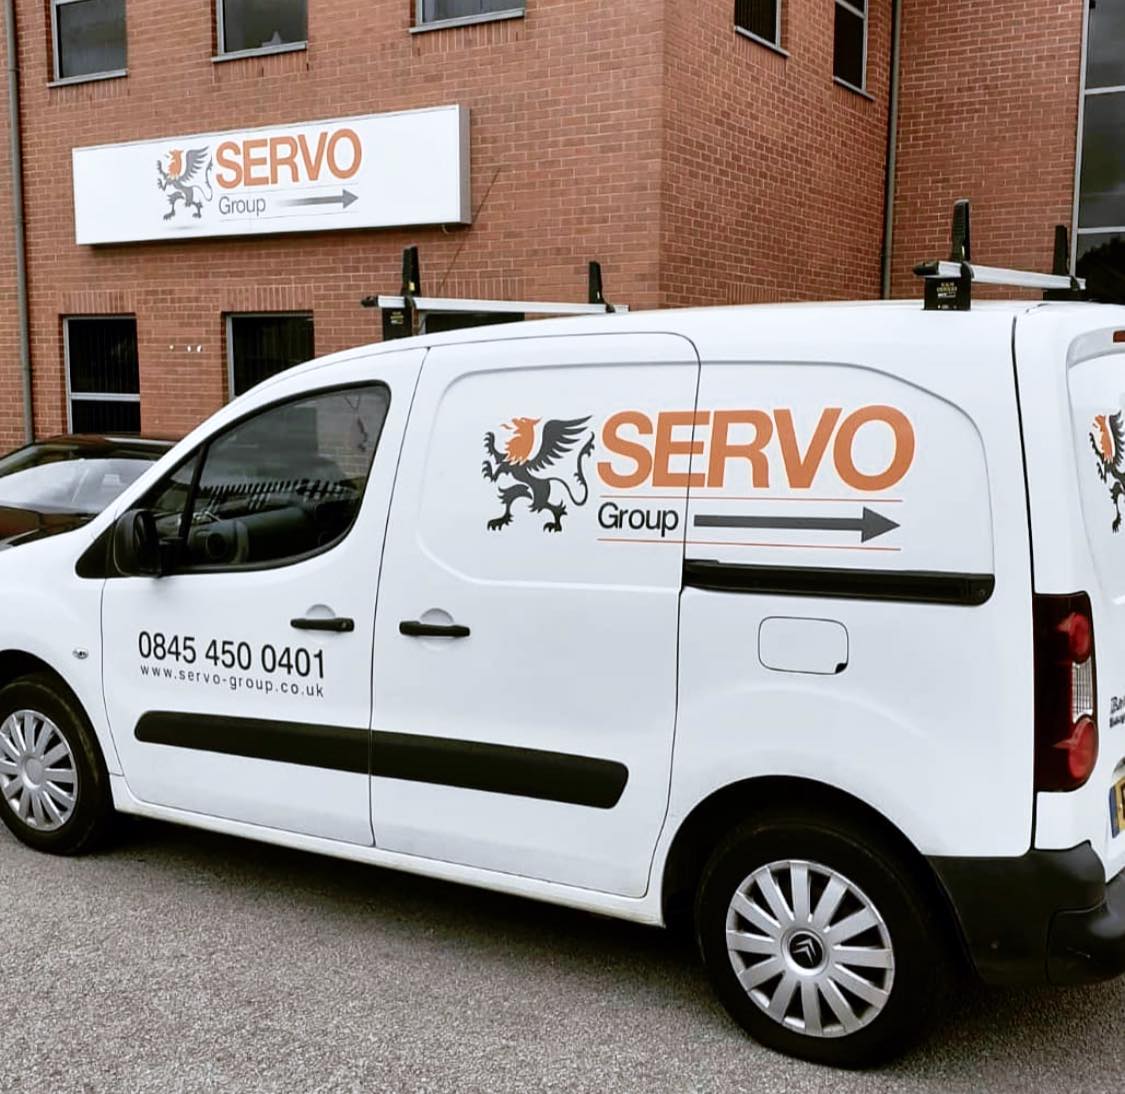 Servo Group Contract Win Will Create Over 100 Jobs in Leeds